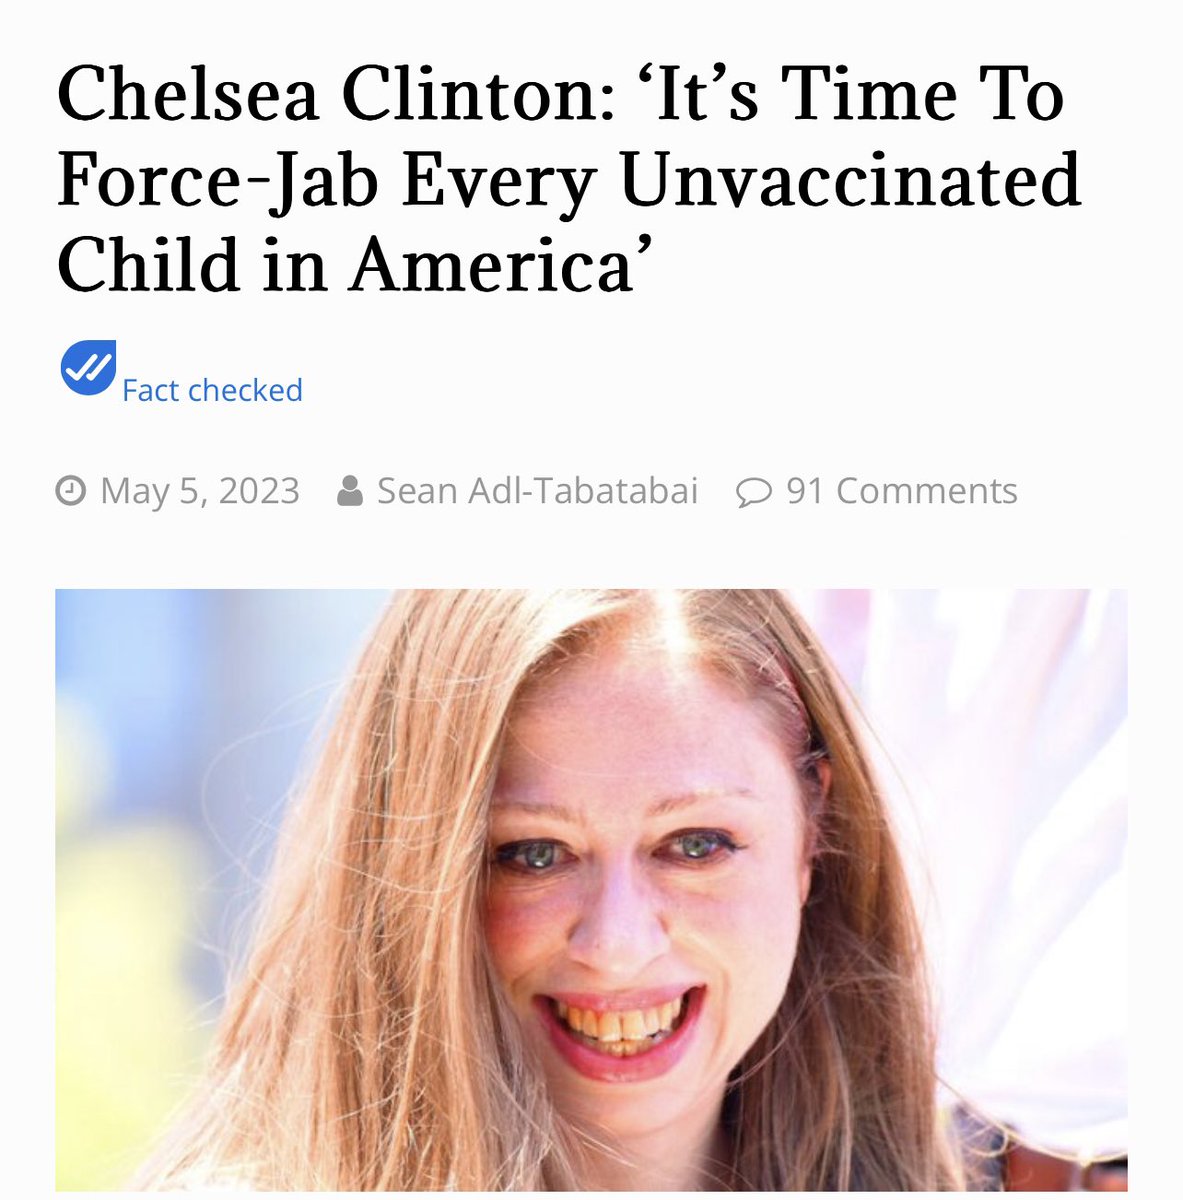 Chelsea Clinton has declared that unvaccinated children in America must be forced to take the mRNA jab with or without parental consent. “The Big Catch-up” will last 18 months and, according to Bill Clinton’s daughter, aims to become “the largest childhood immunization effort…